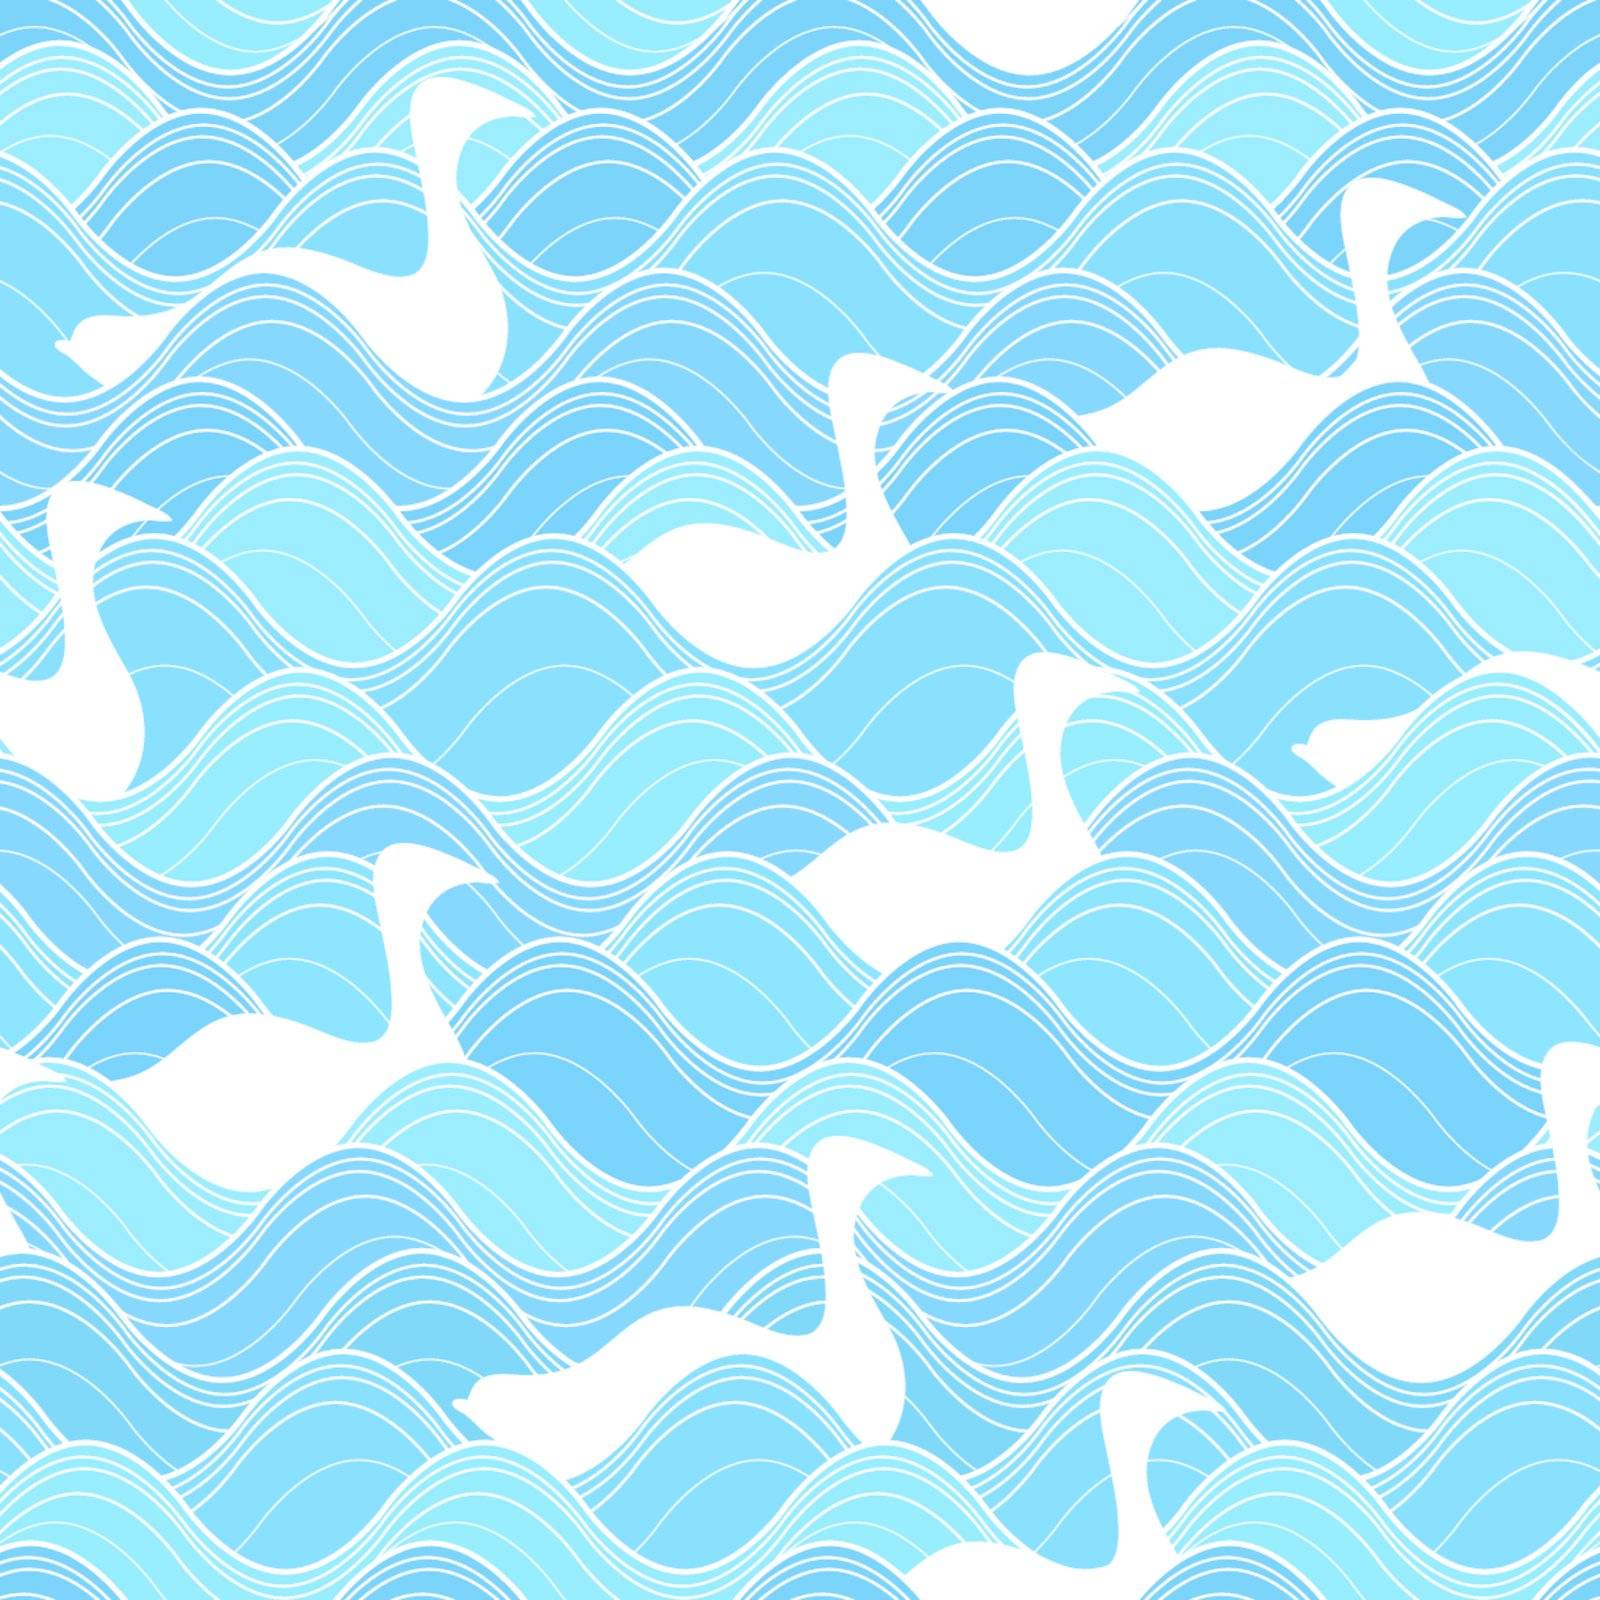 Editable vector seamless tile illustration of white birds on blue water waves with birds easily removable to leave water pattern